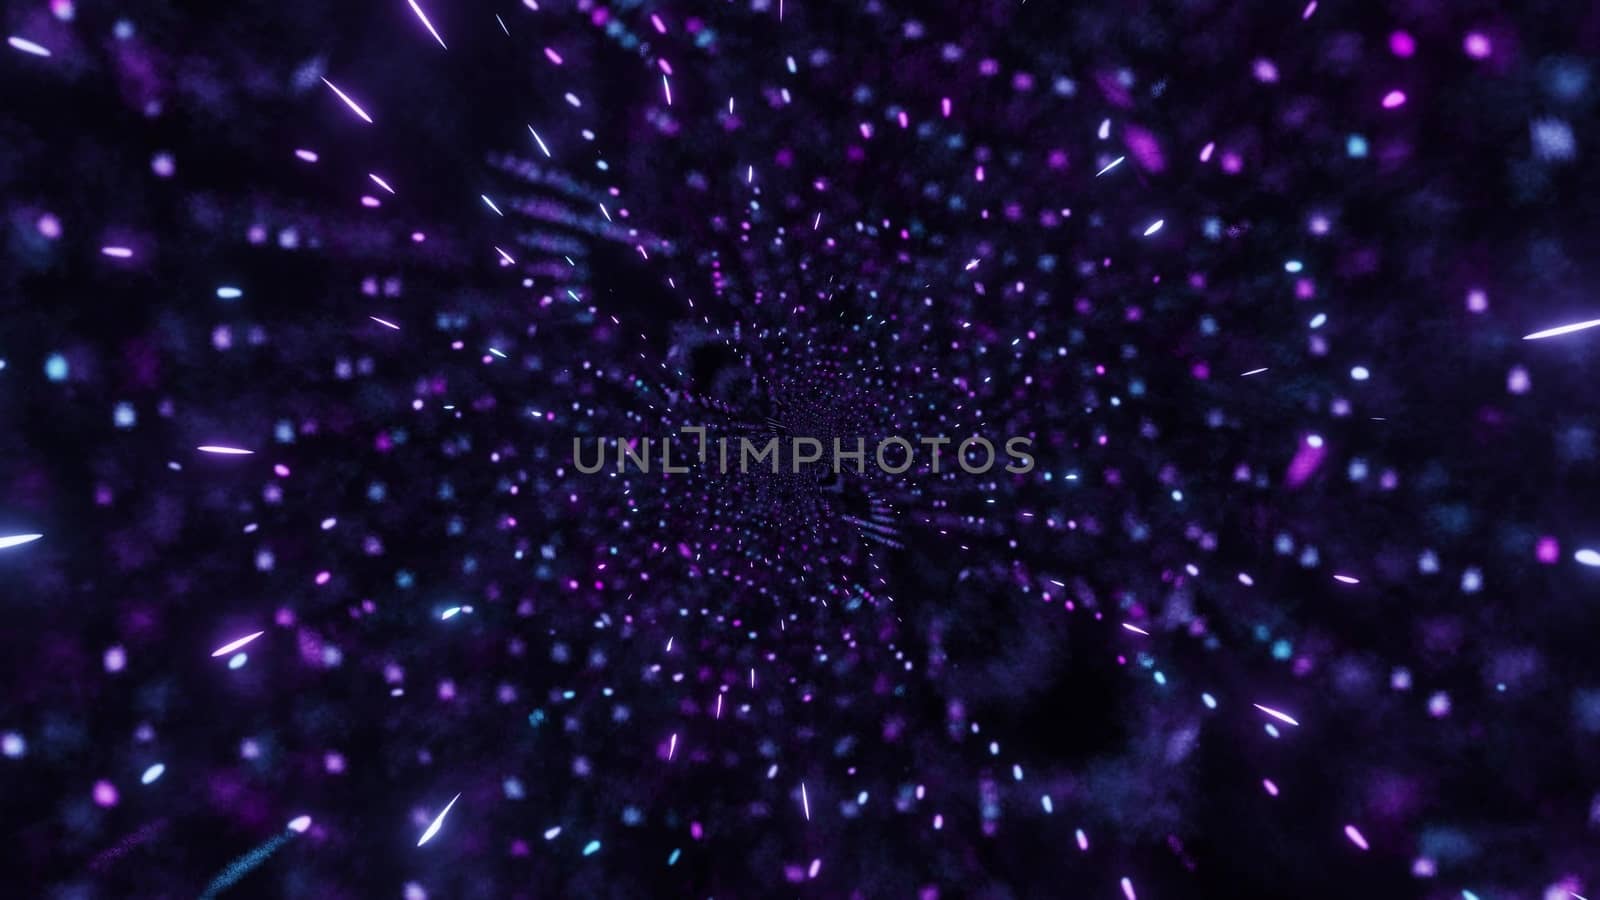 abstract glowing colorful multicolor space galaxy 3d illustration graphic design artwork background wallpaper by tunnelmotions